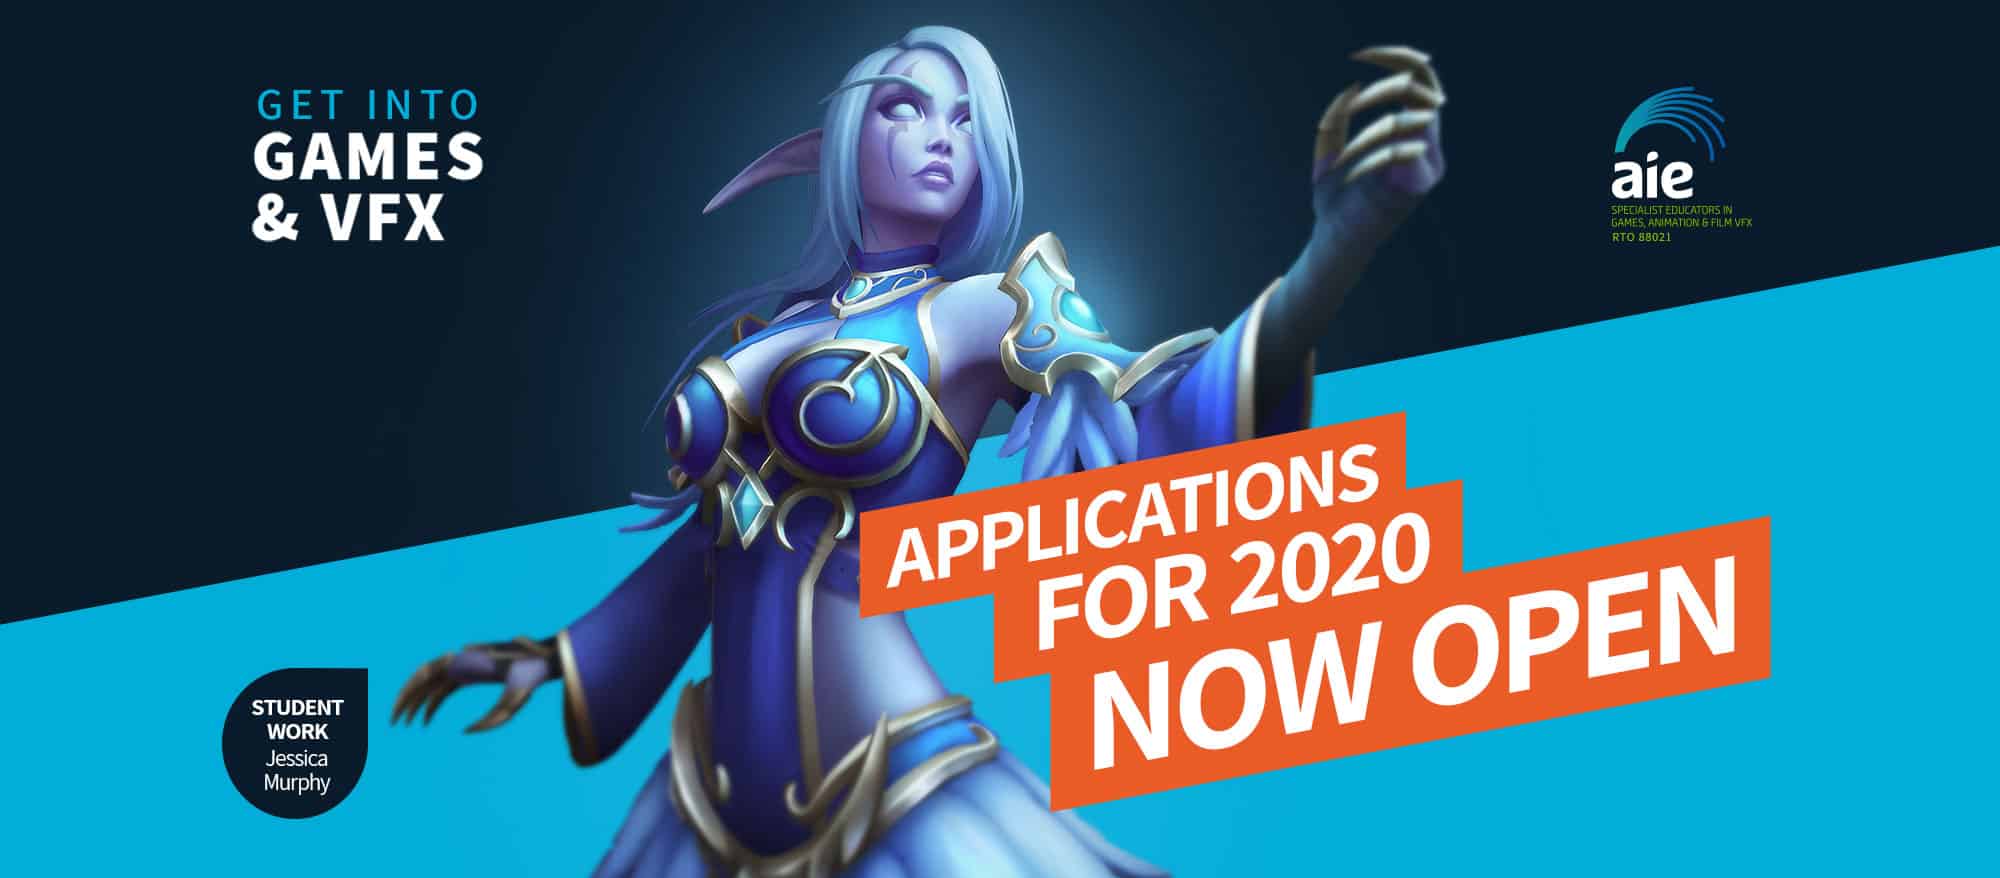 2020 Applications Now Open | AIE